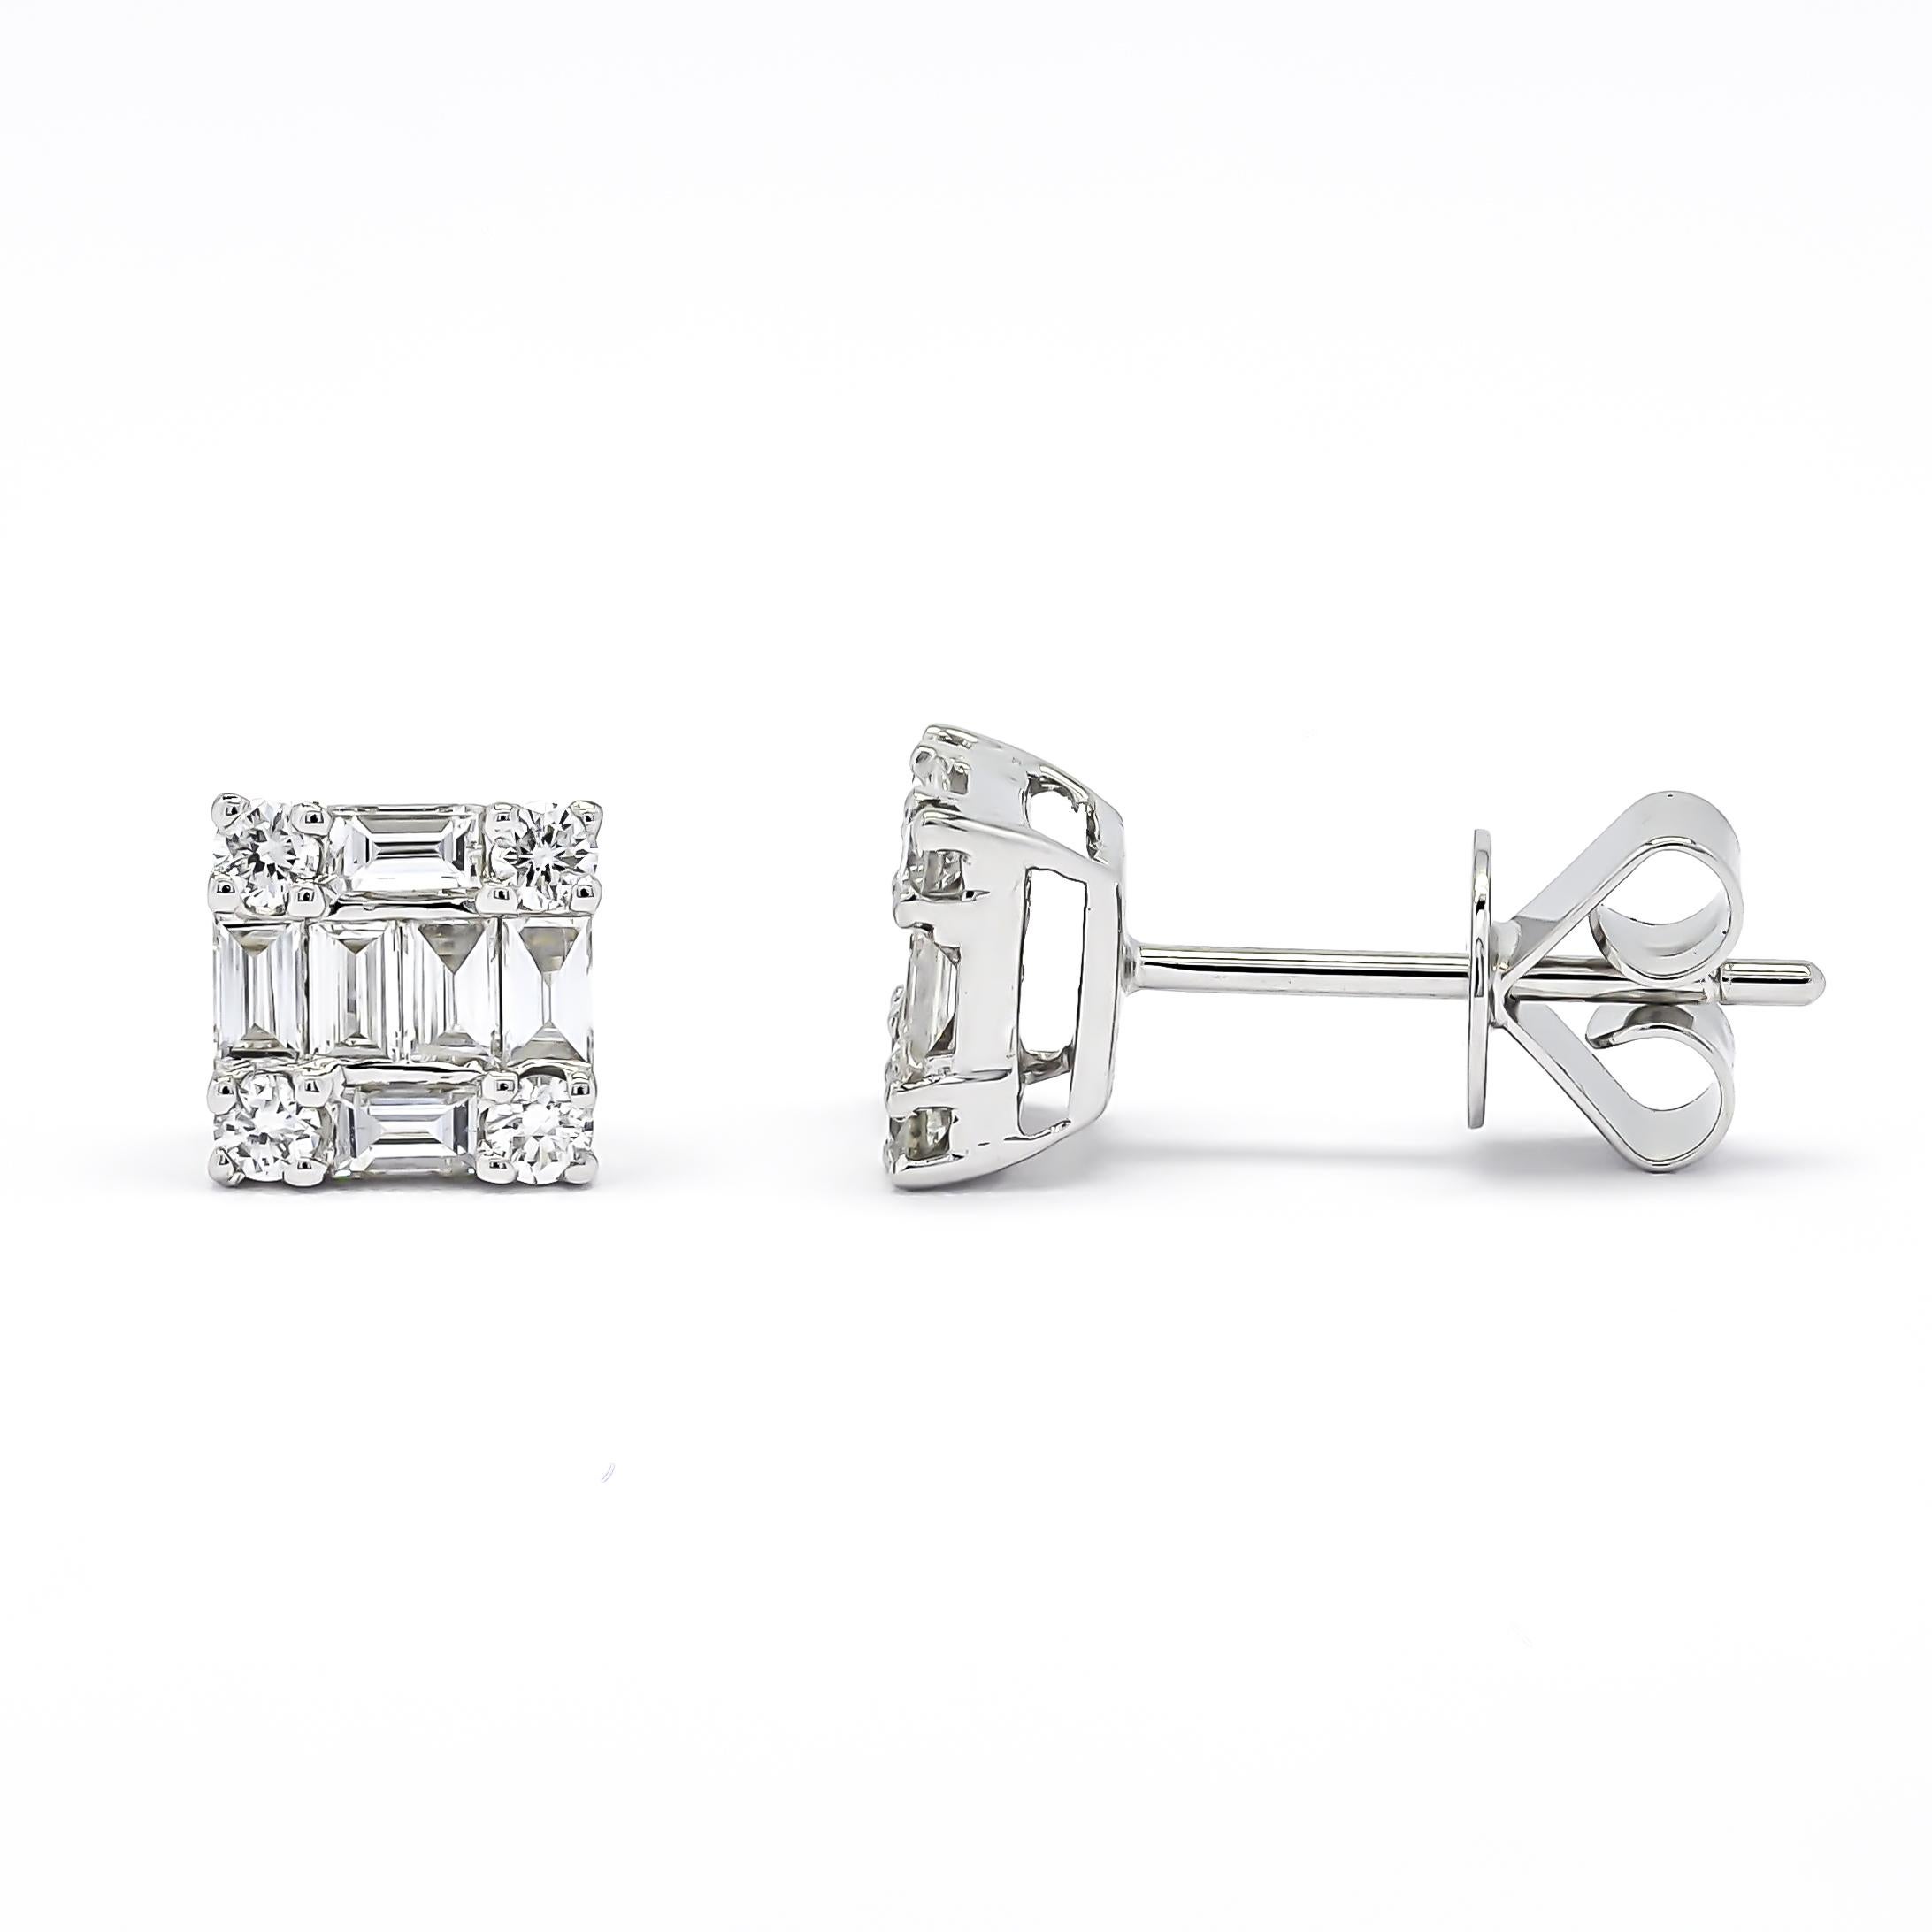 Introducing our mesmerizing 18KT white gold stud earrings, boasting a distinctive illusion square design that captivates the eye. These exquisite earrings are adorned with a combination of sparkling baguette-cut and round brilliant natural diamonds,